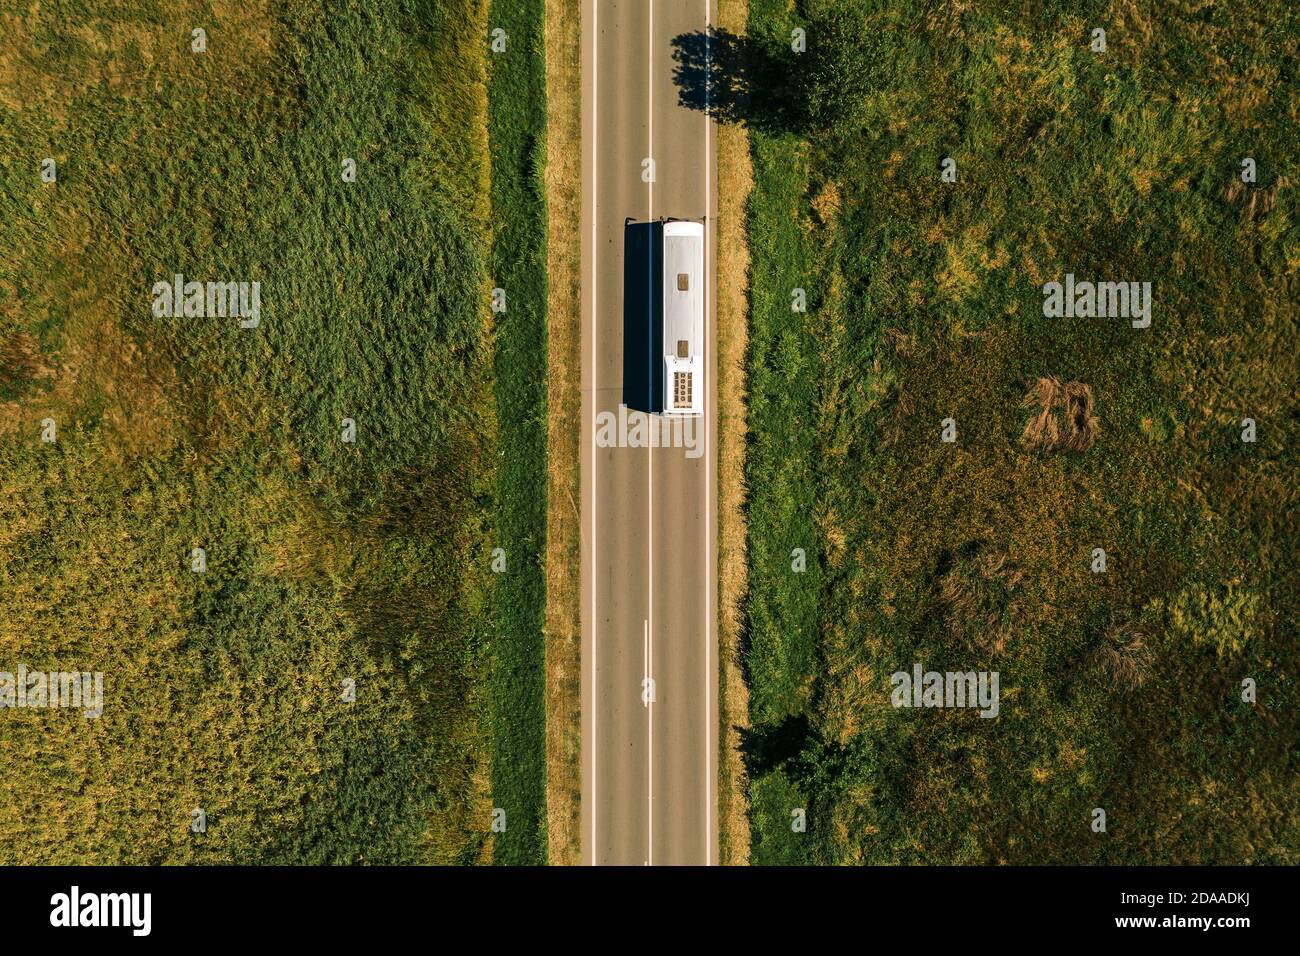 Aerial view of passenger bus on road through countryside, top view from drone pov Stock Photo